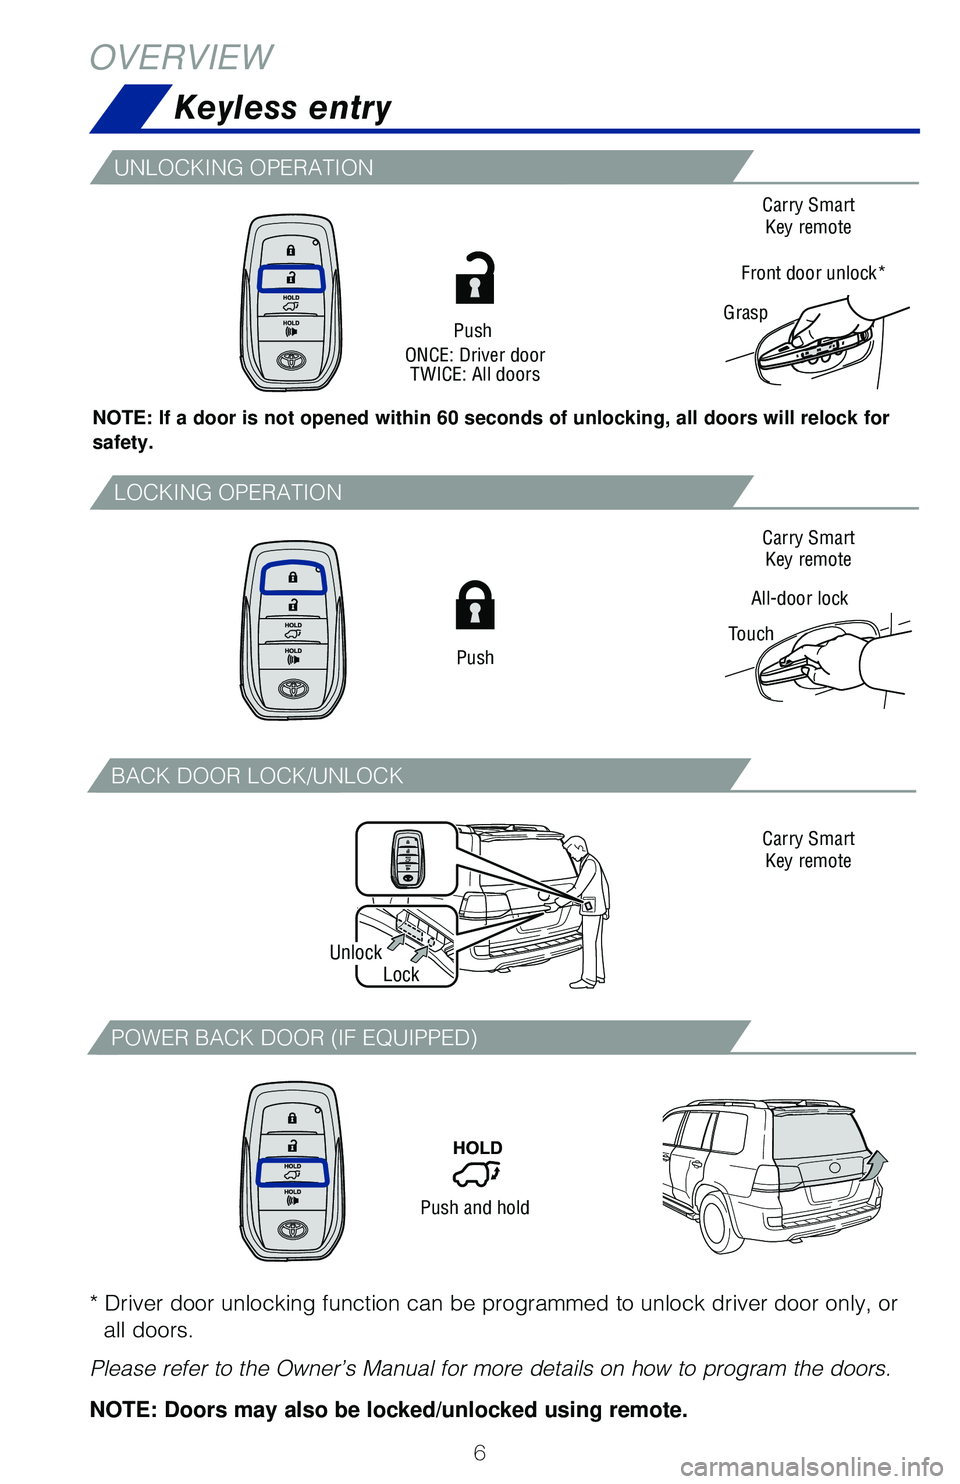 TOYOTA LAND CRUISER 2020  Owners Manual (in English) 6
Keyless entry
OVERVIEW
NOTE: If a door is not opened within 60 seconds of unlocking, all doors will relock for 
safety.
Push
ONCE: Driver door TWICE: All doors
All-door lock
Touch Carry Smart 
Key r